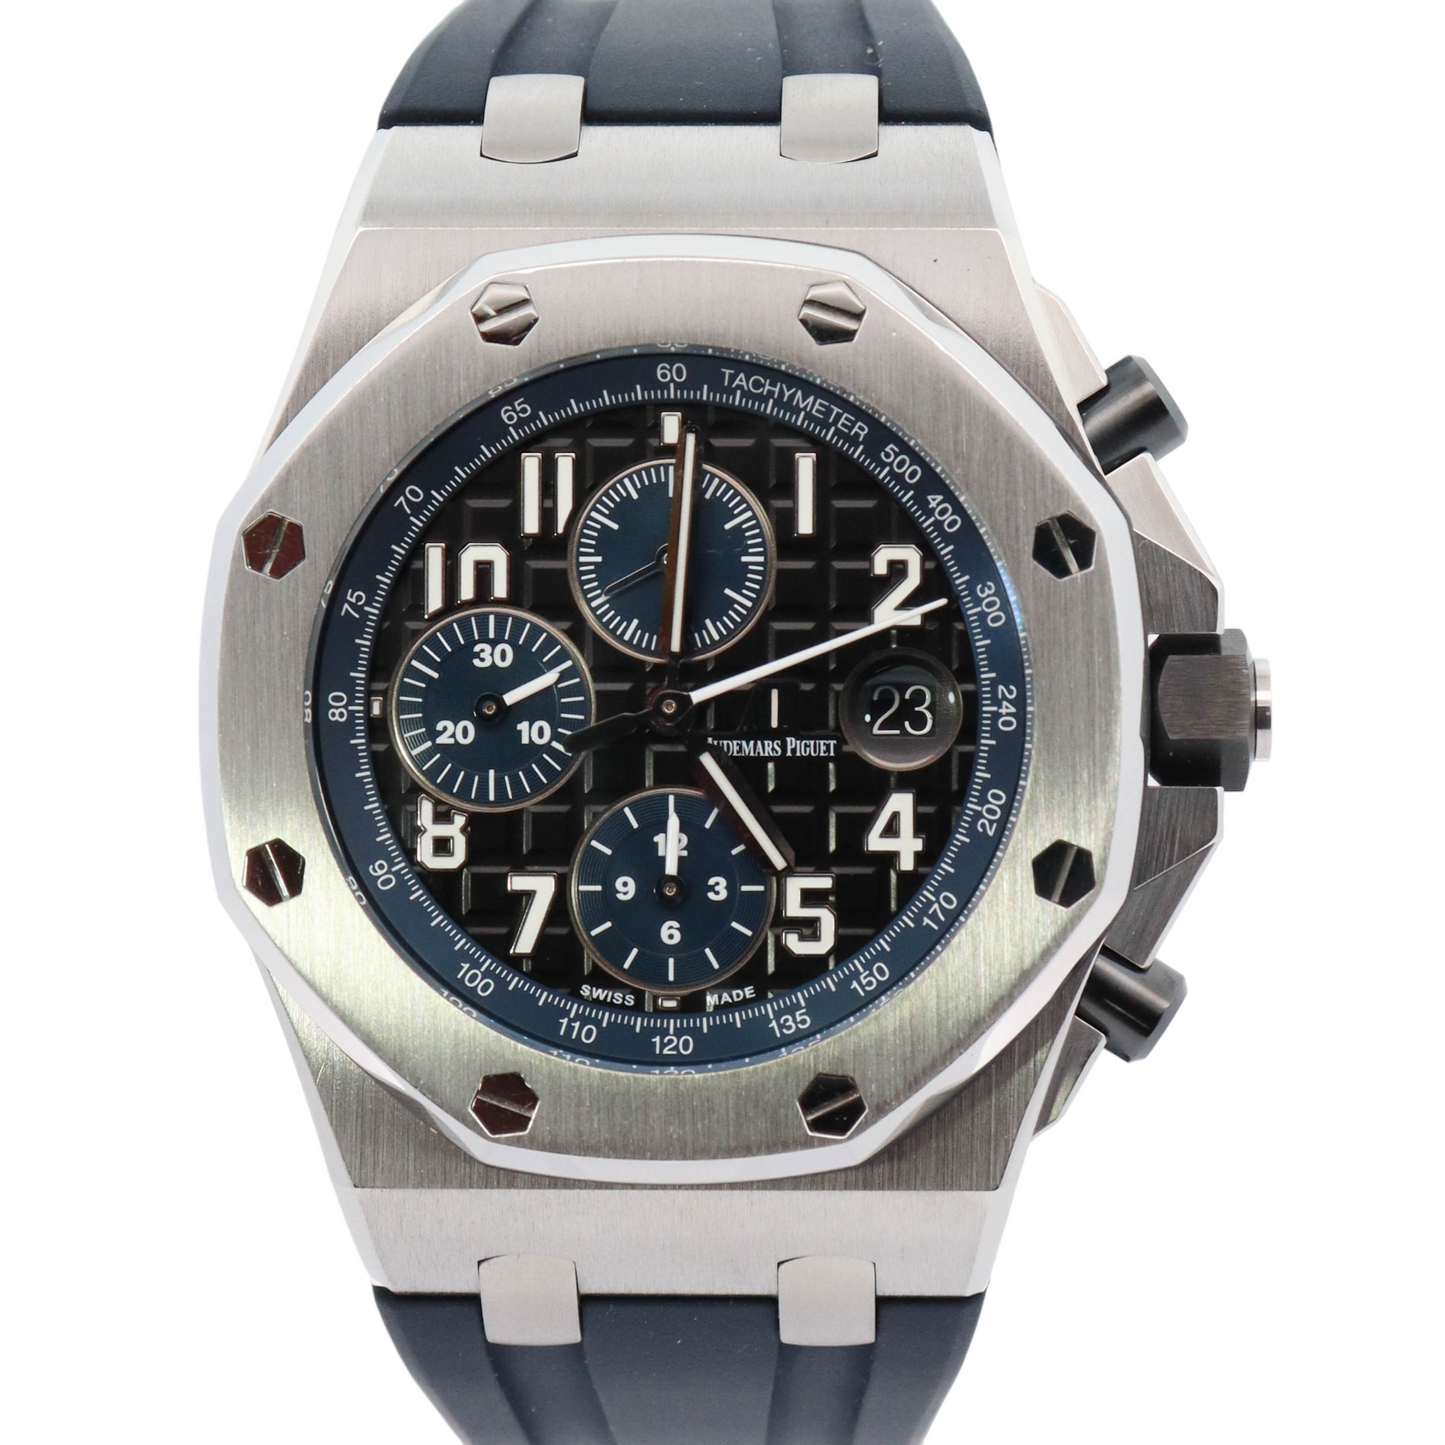 Audemars Piguet Royal Oak Offshore Stainless Steel 42mm Brown Chronograph Dial Watch Reference# 26470ST.OO.A028CR.01